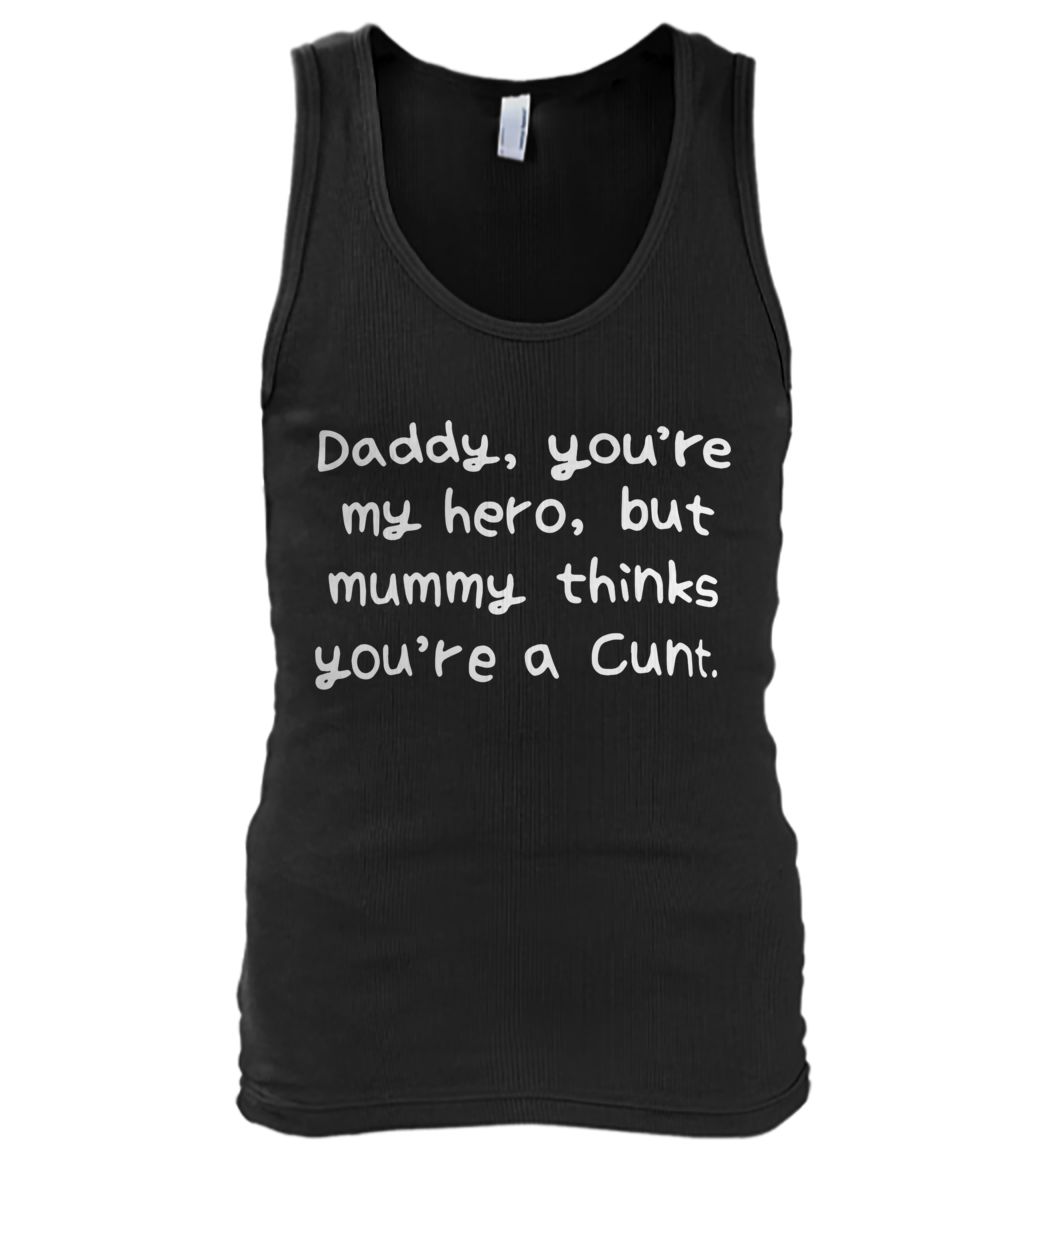 Daddy you're my hero but mummy thinks you're a cunt men's tank top